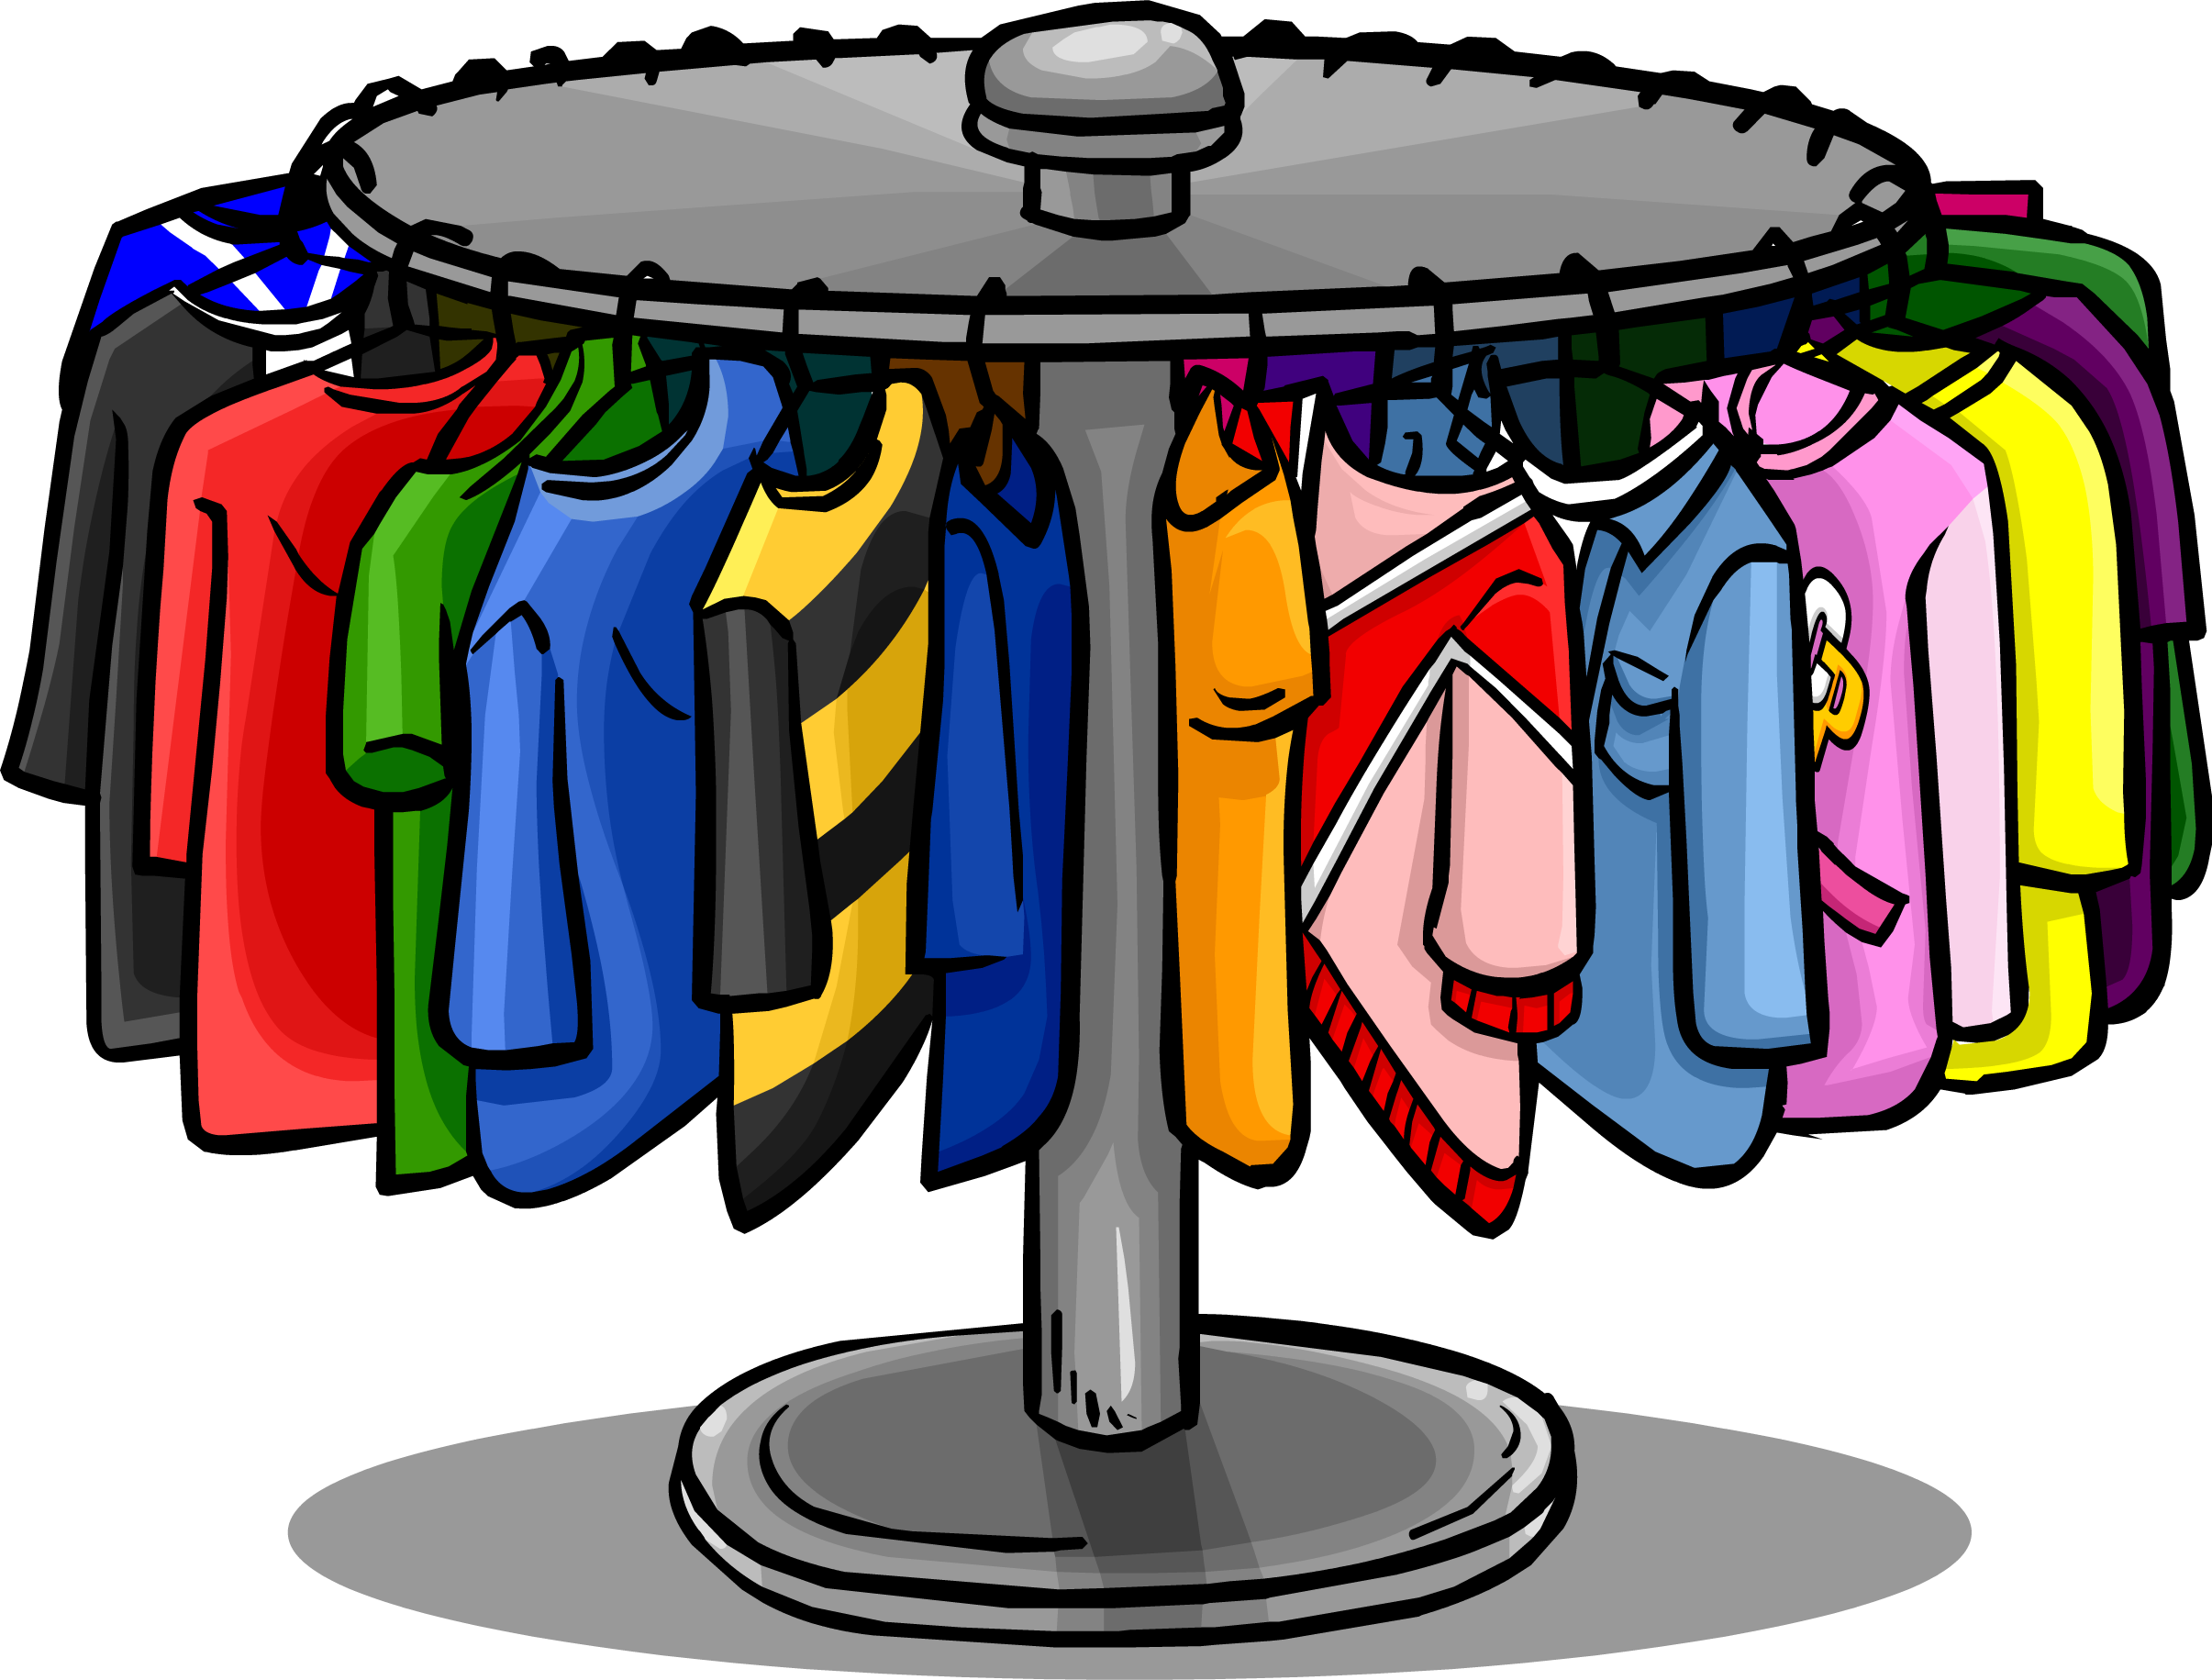 Clothing sale clipart kid - Clothing Clip Art